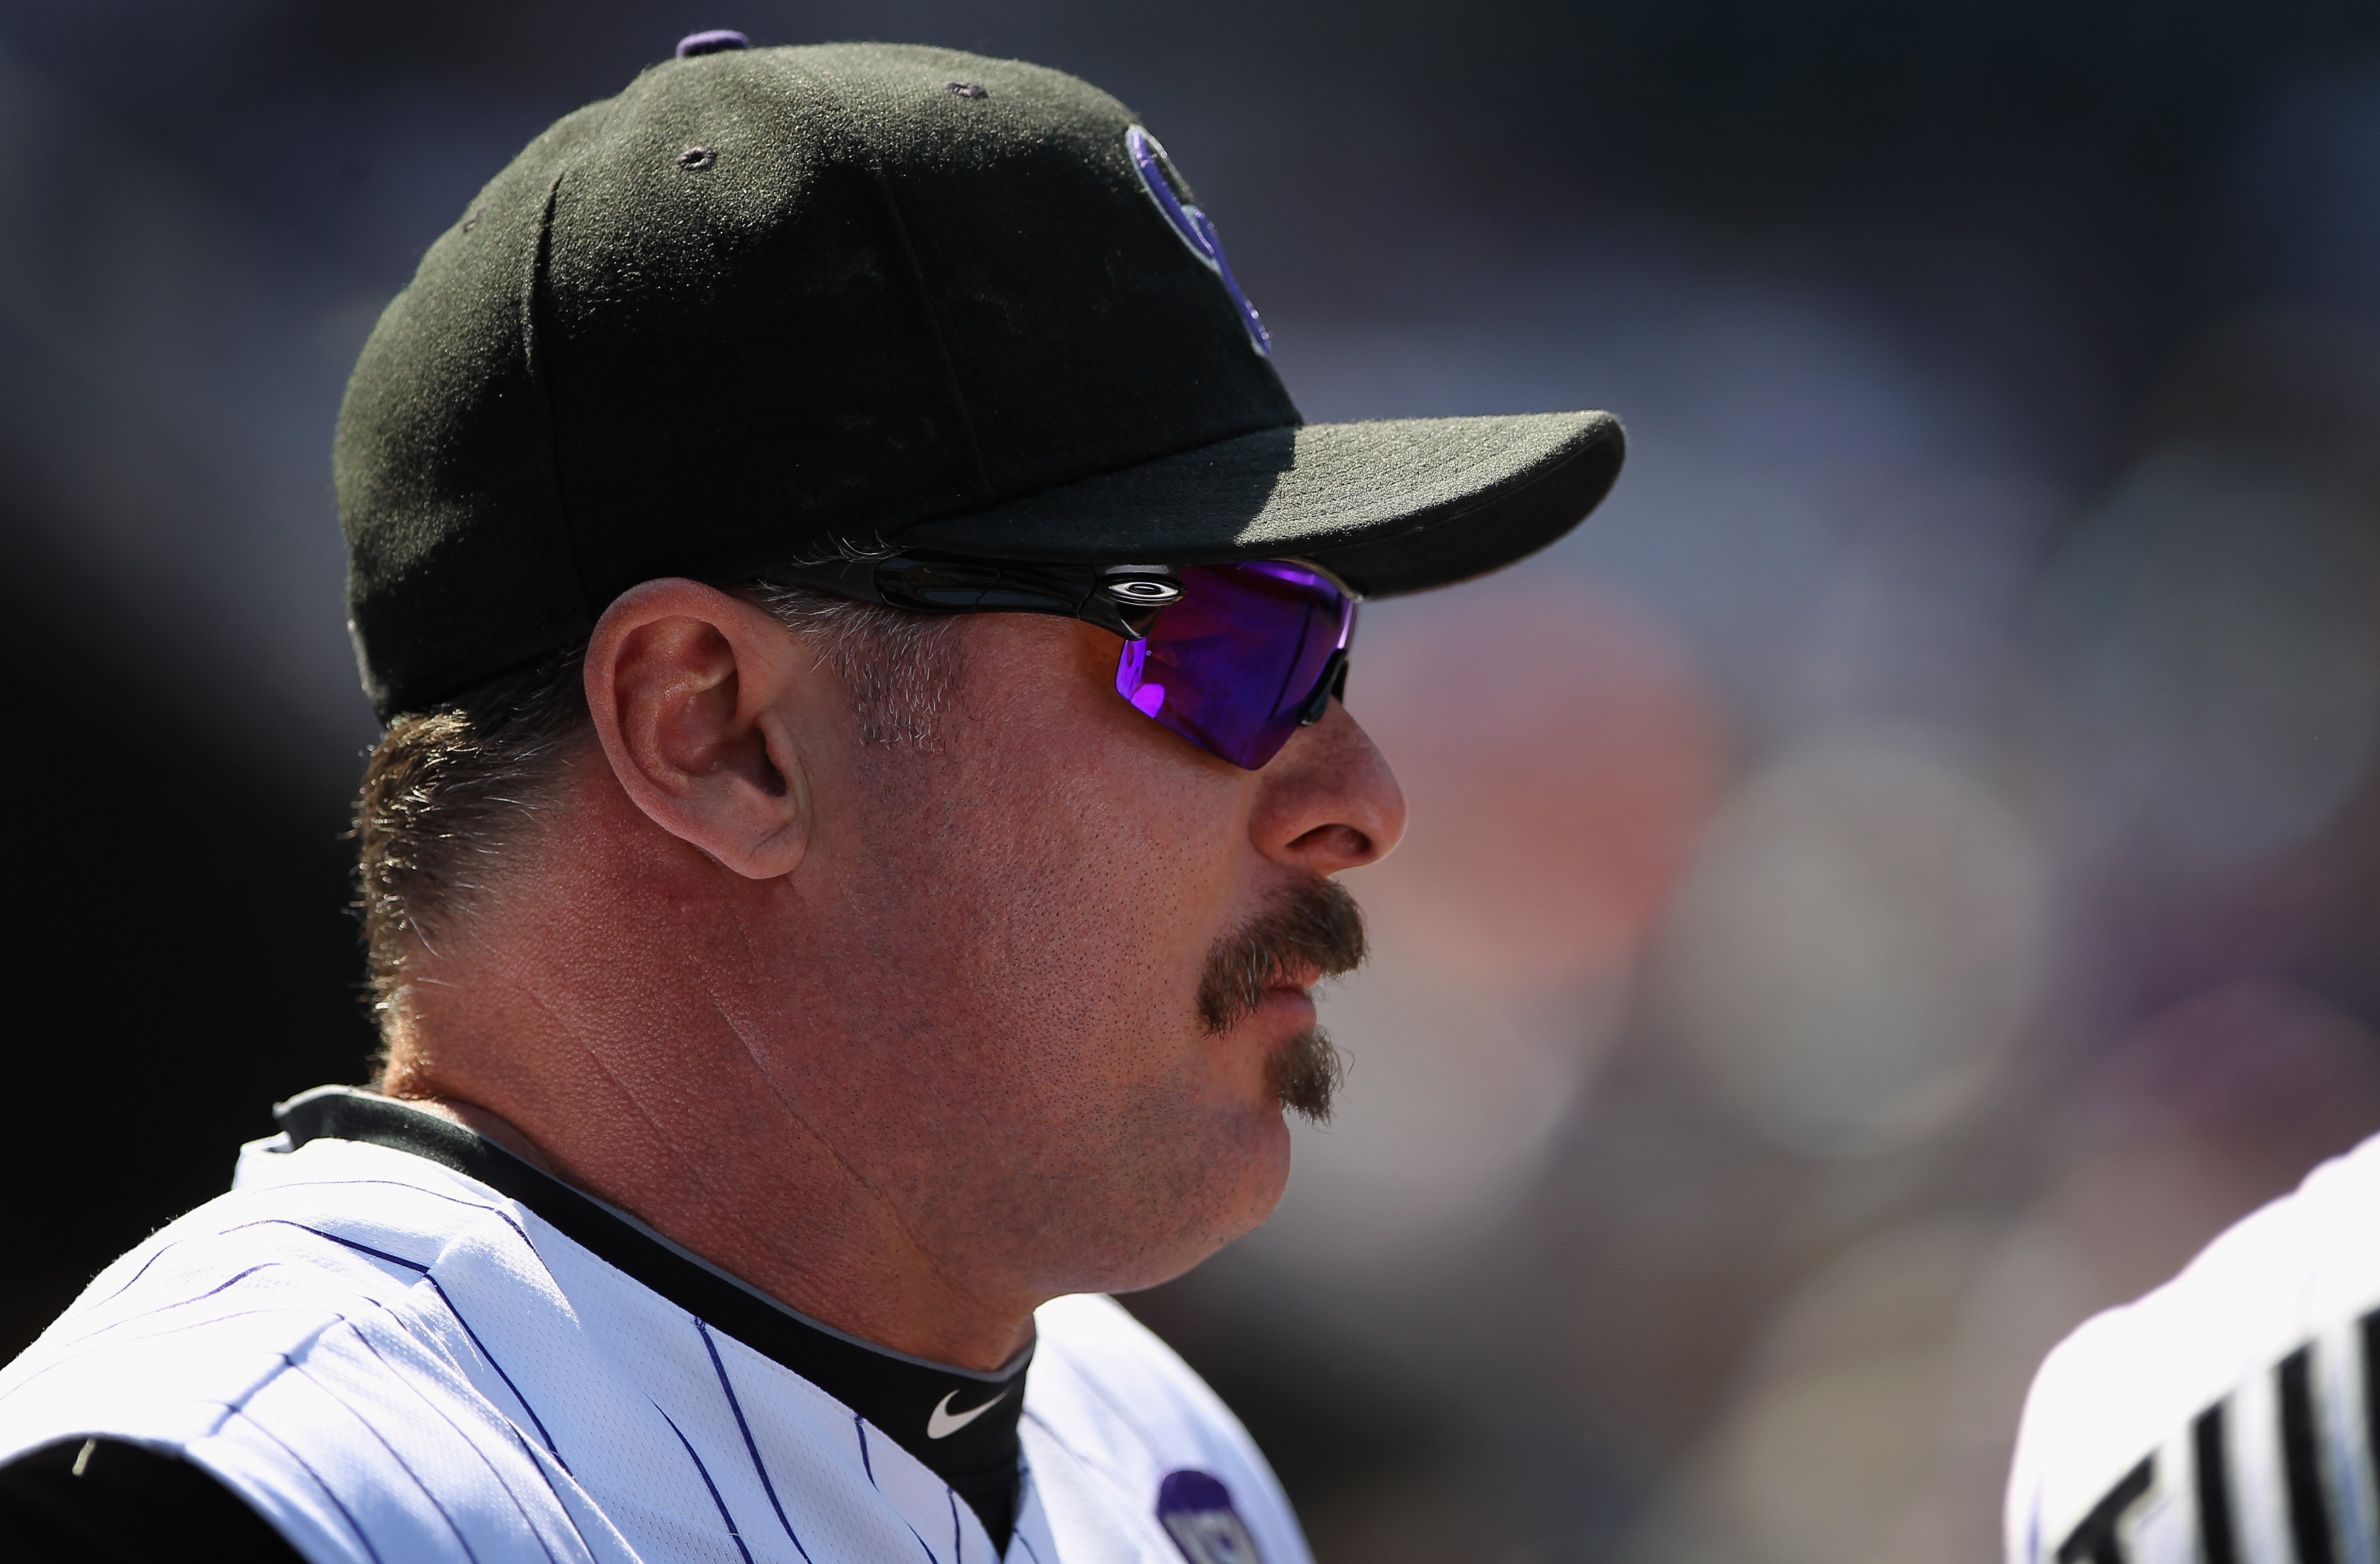 DENVER - SEPTEMBER 15:  Jason Giambi #23 of the Colorado Rockies looks on from the dugout against the San Diego Padres at Coors Field on September 15, 2010 in Denver, Colorado. The Rockies defeated the Padres 9-6.  (Photo by Doug Pensinger/Getty Images)